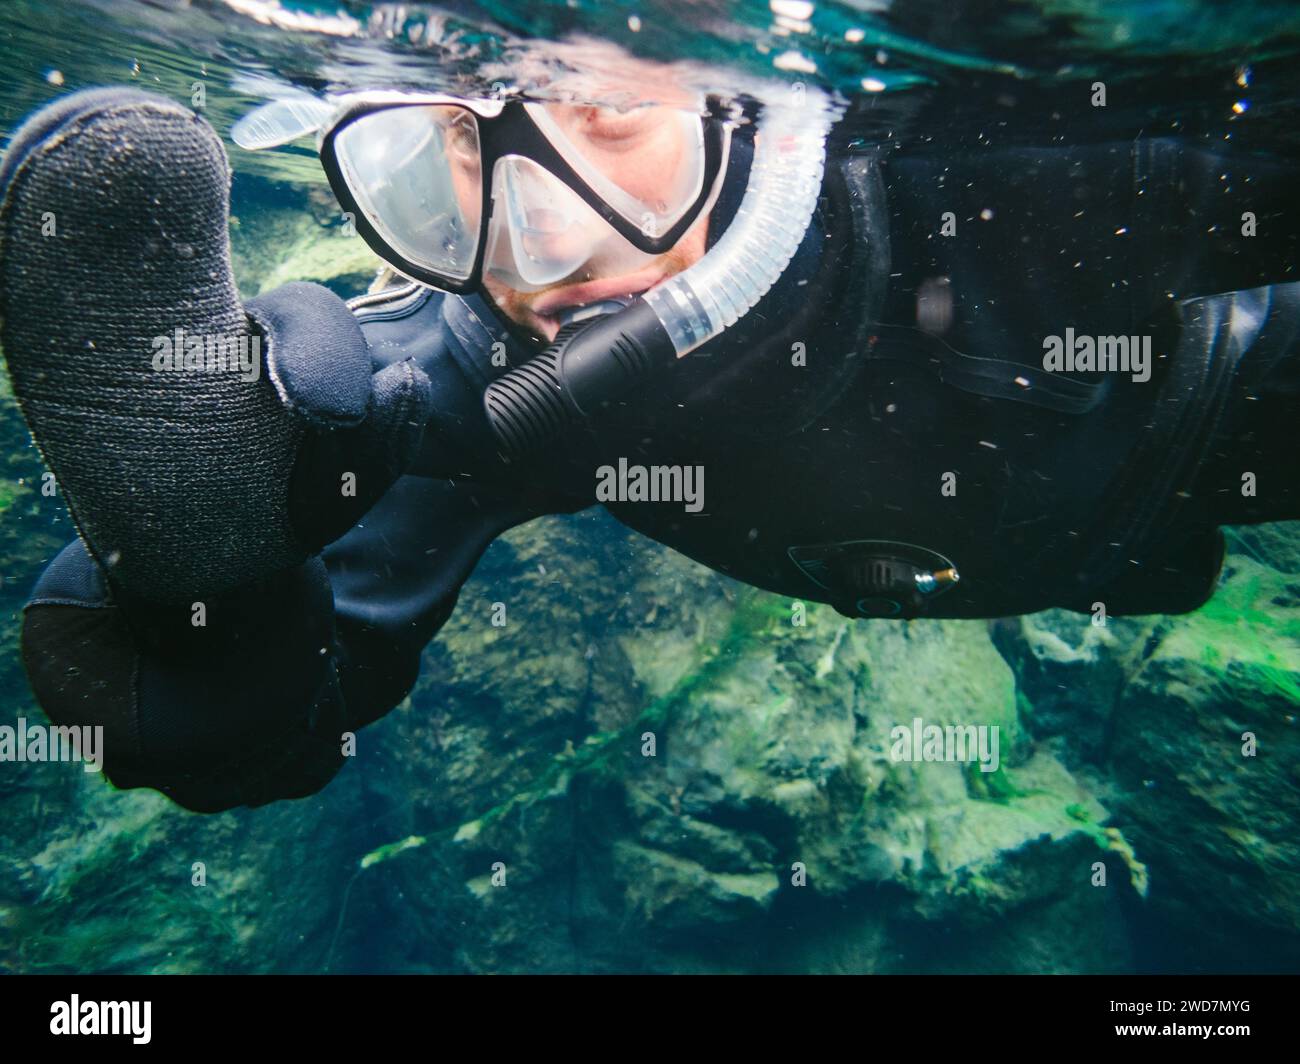 Man with snorkel mask underwater gives okay sign Stock Photo